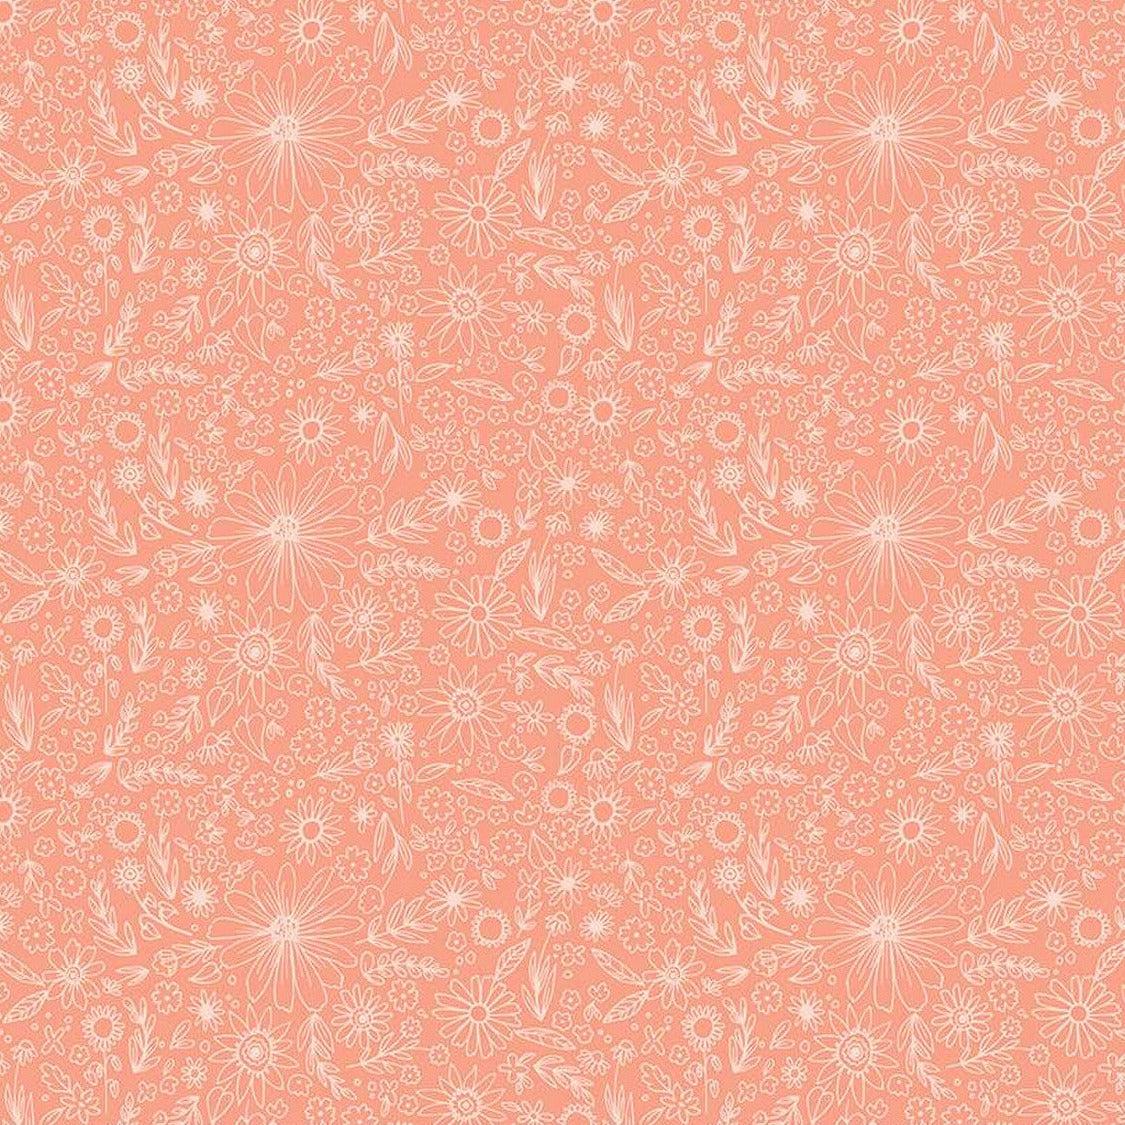 Homemade Coral Outlined Flowers Fabric